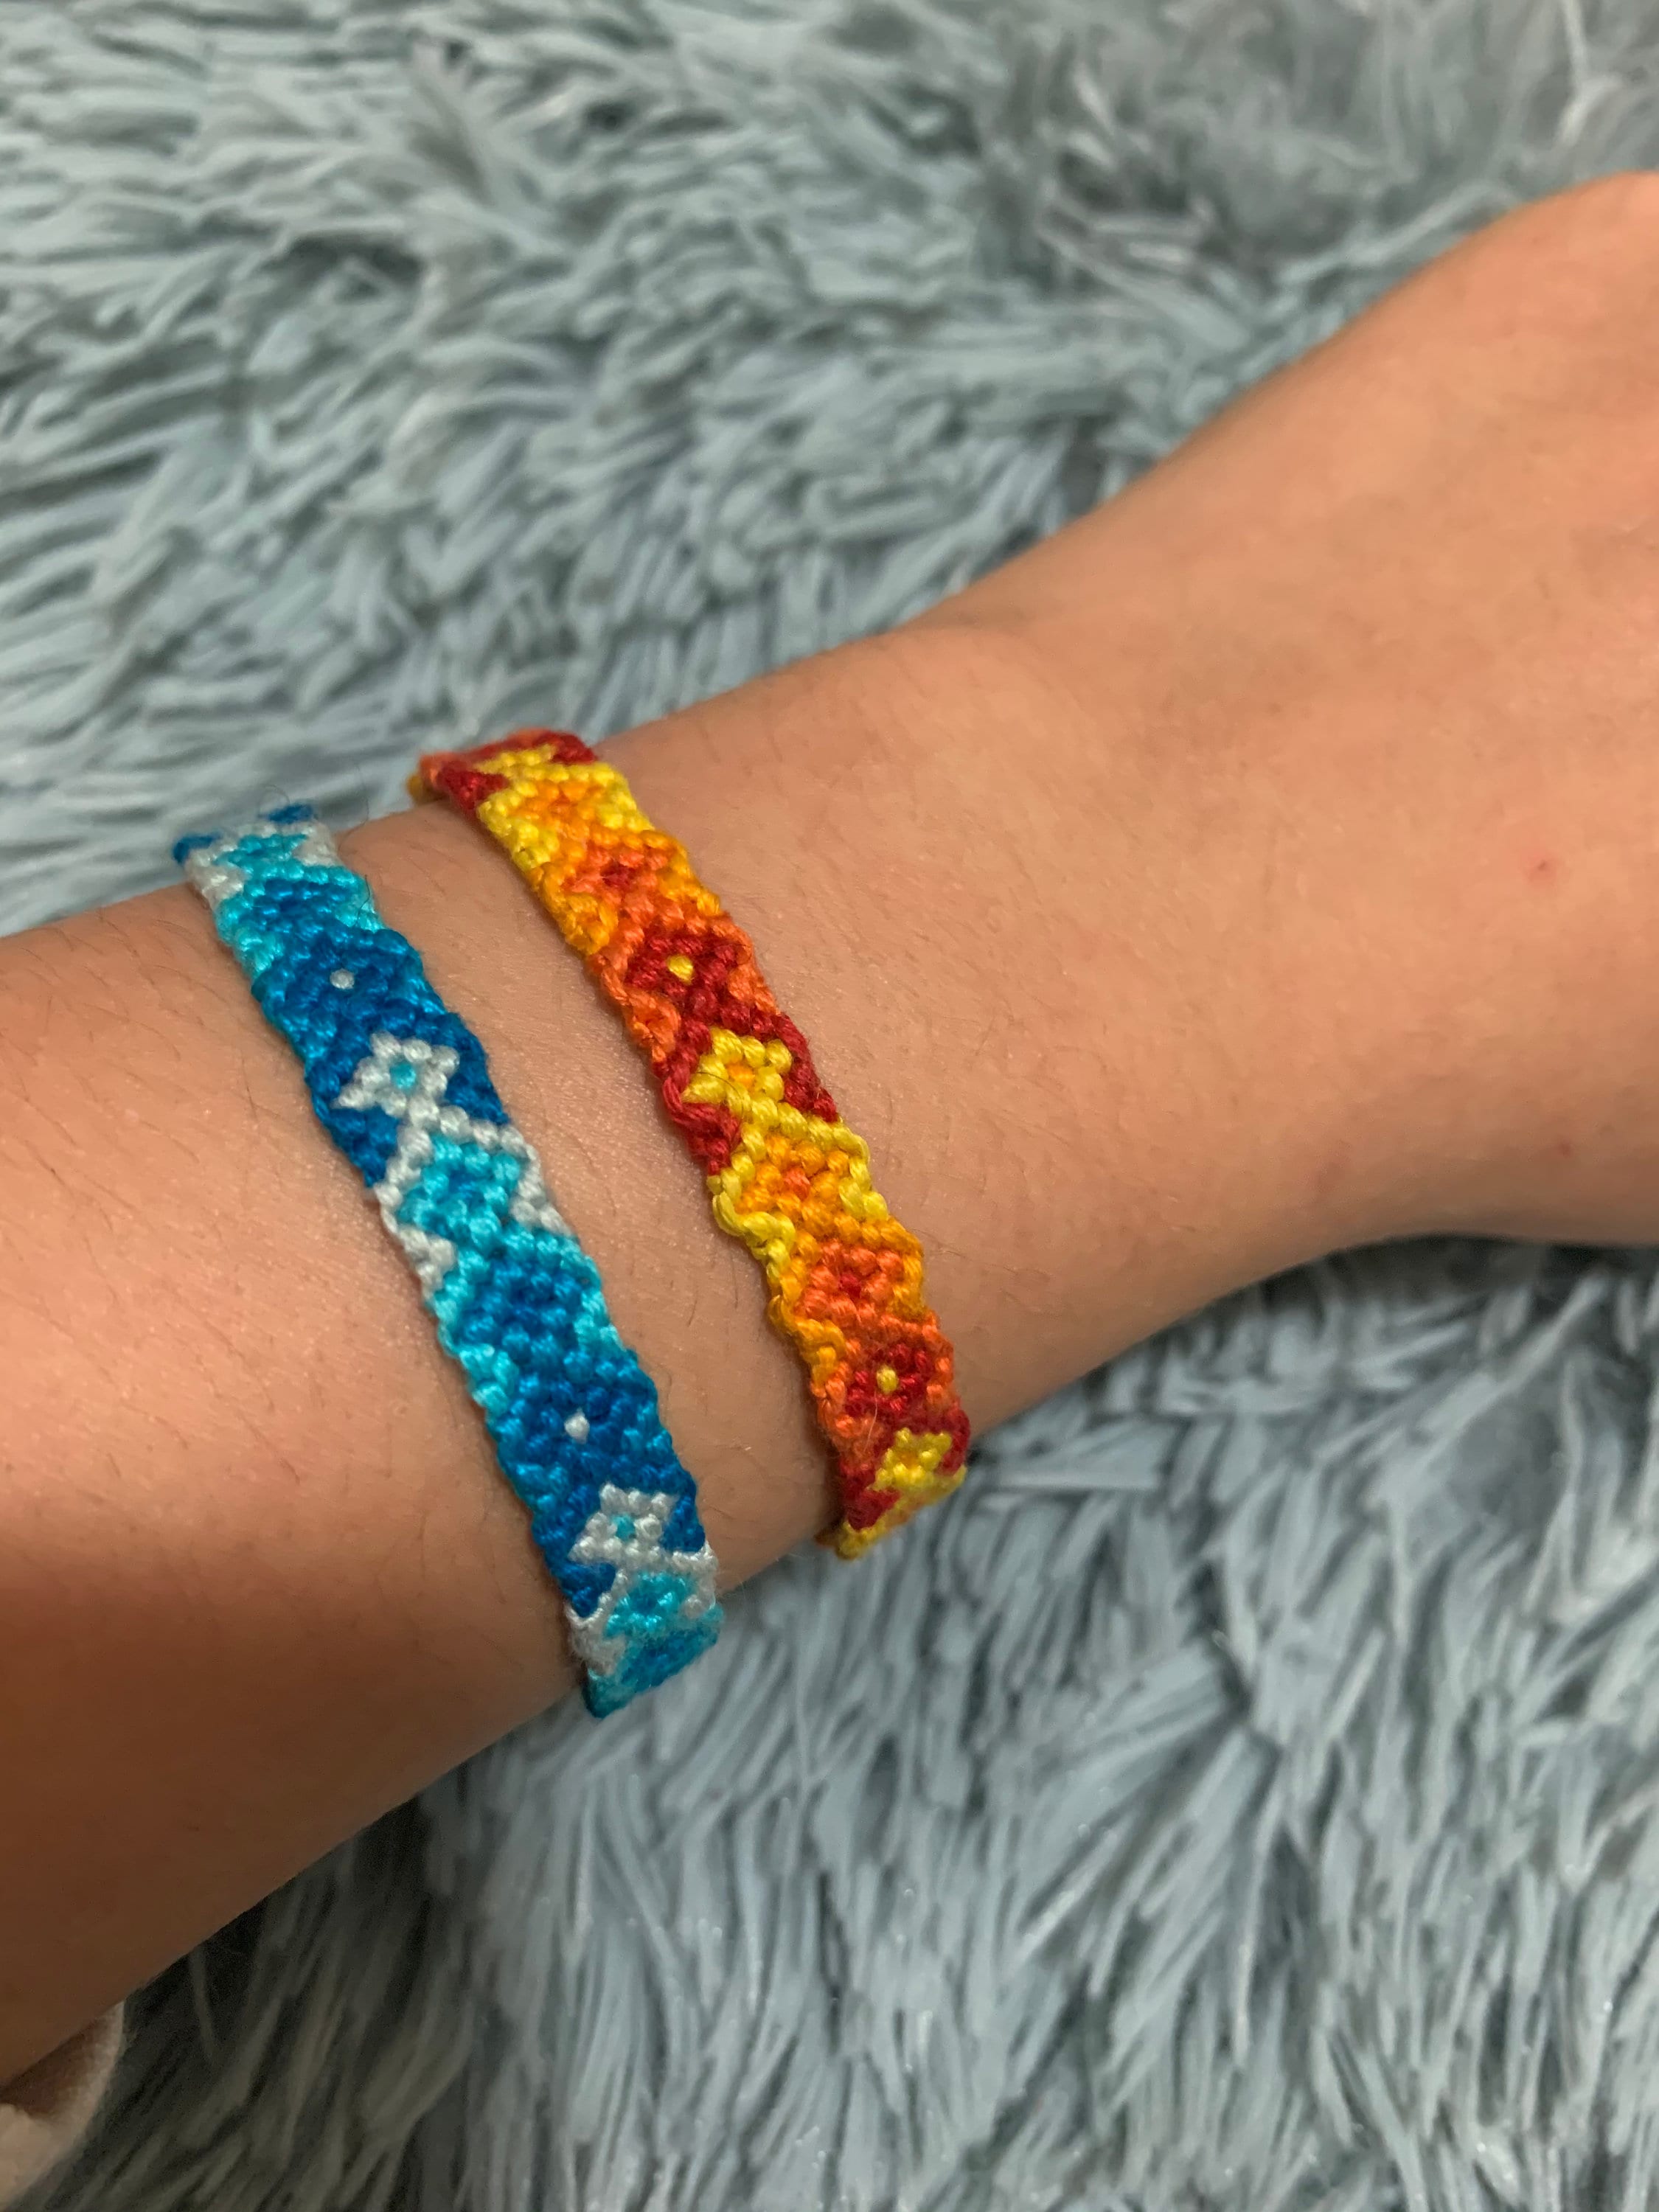 Fire and Ice pair of Friendship Bracelets